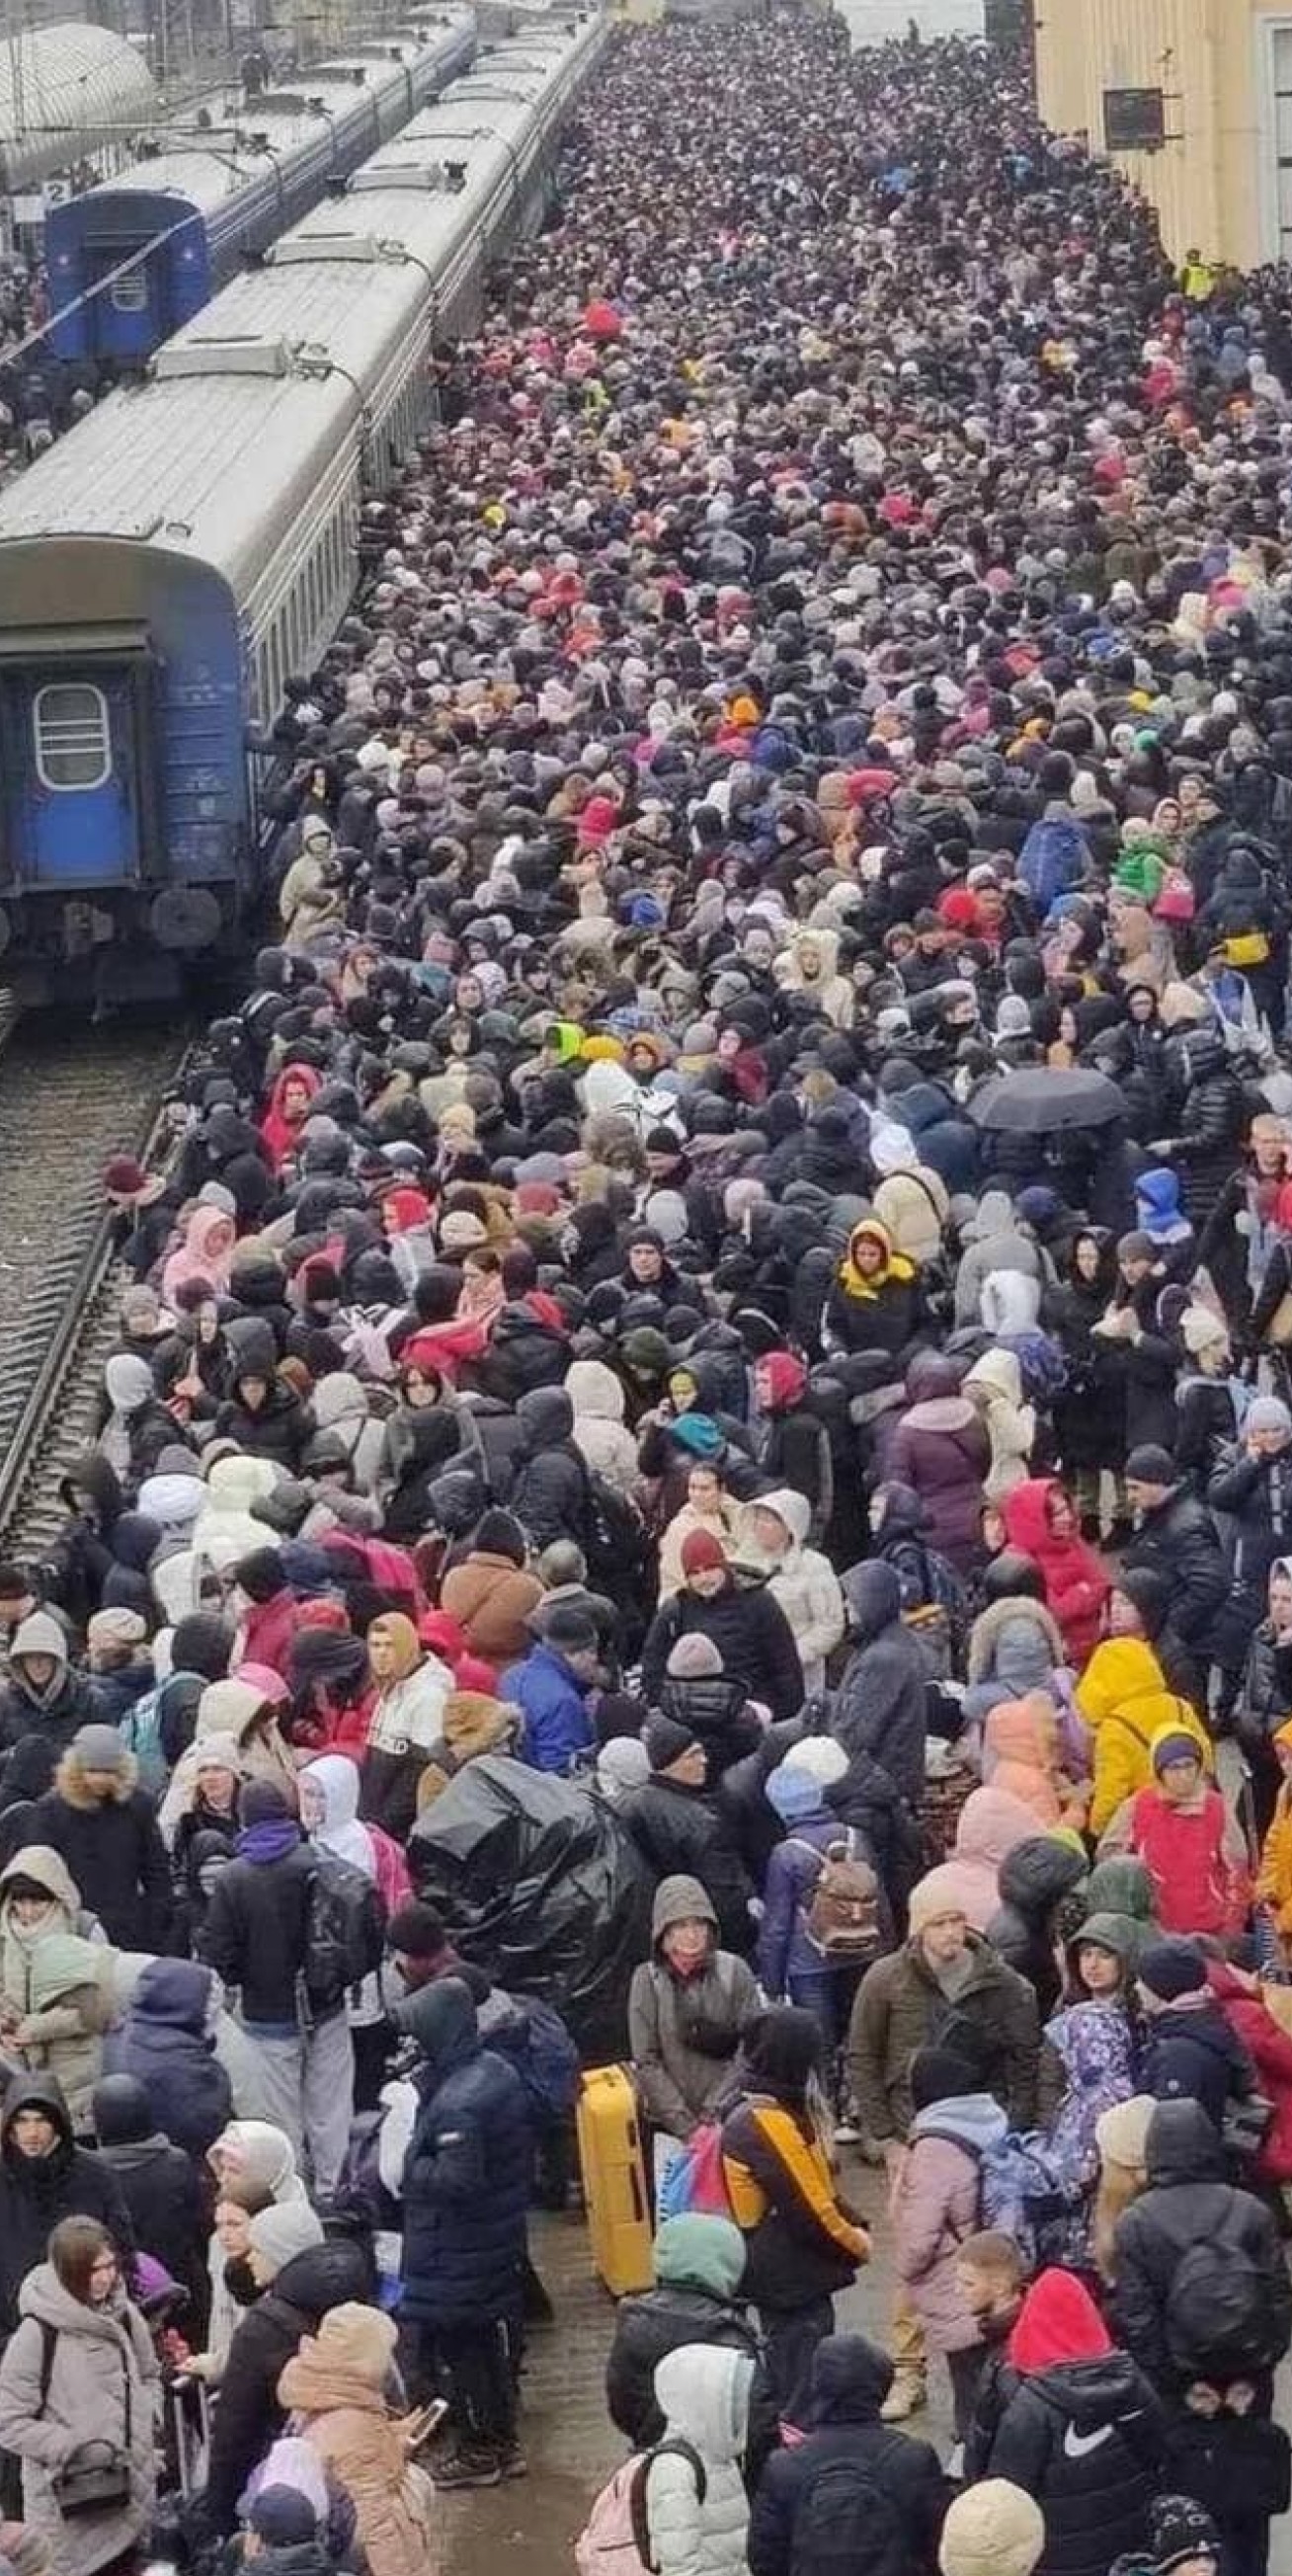 Ukrainians fleeing the war, taken by refugees on their way to France